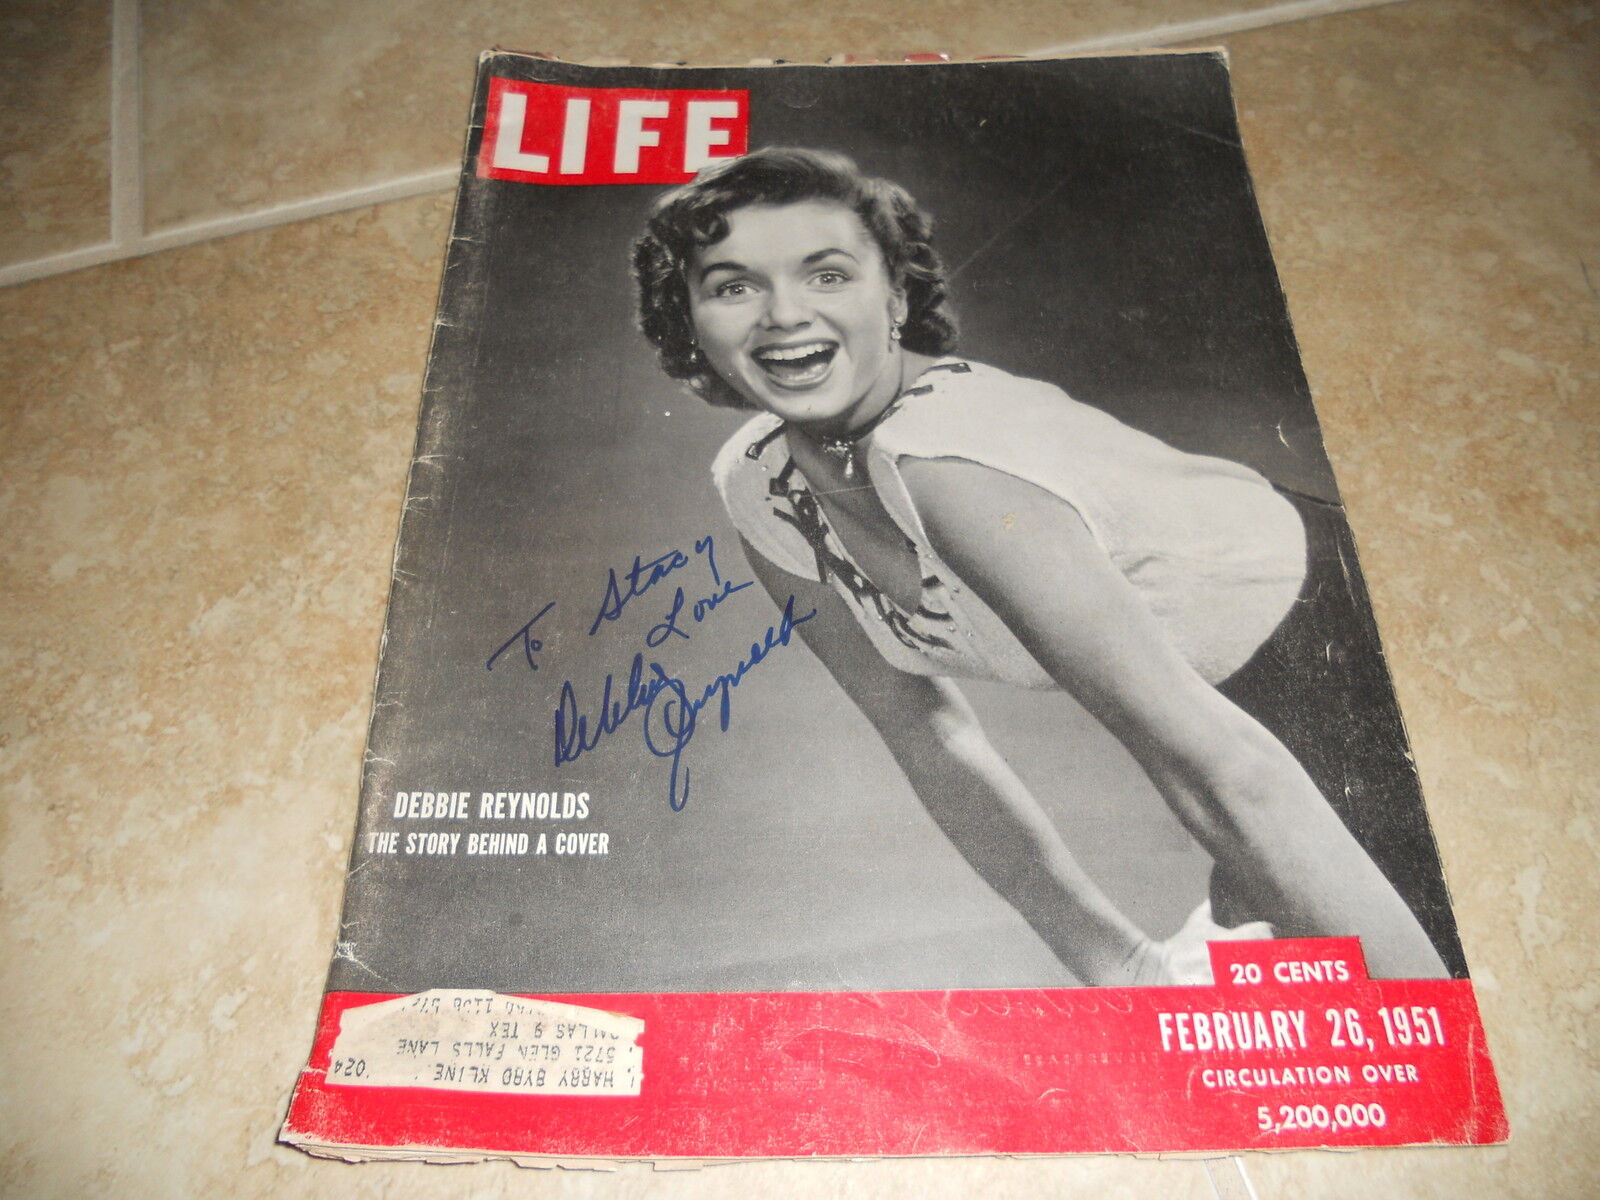 Debbie Reynolds Signed Autographed 1951 Life Magazine Cover Photo Poster painting PSA Guaranteed